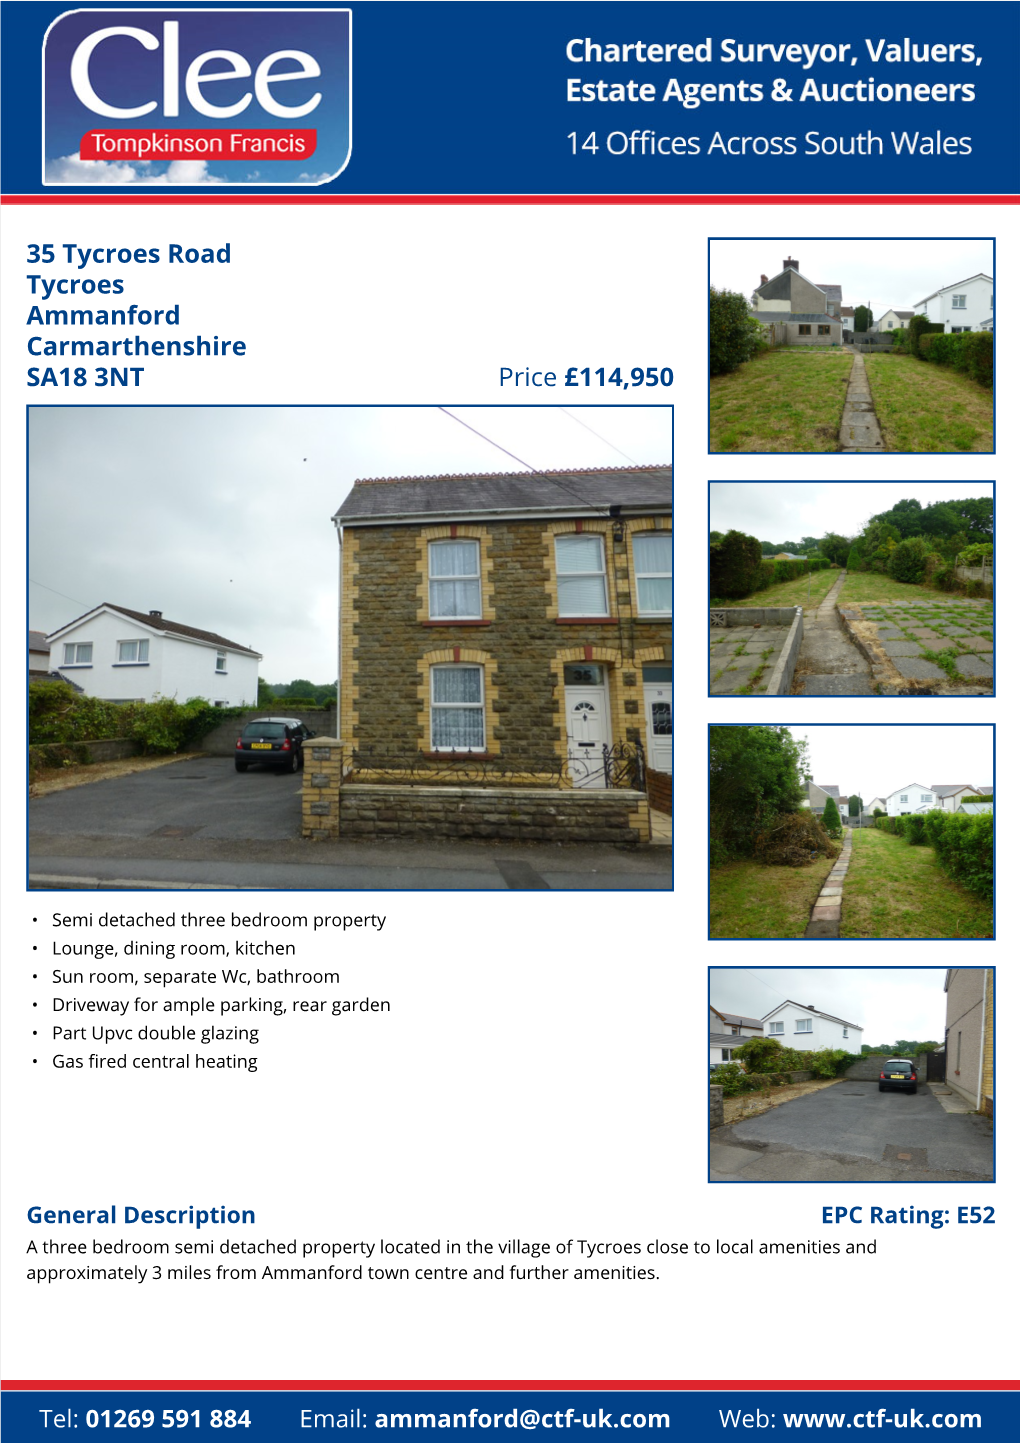 35 Tycroes Road Tycroes Ammanford Carmarthenshire Price £114,950